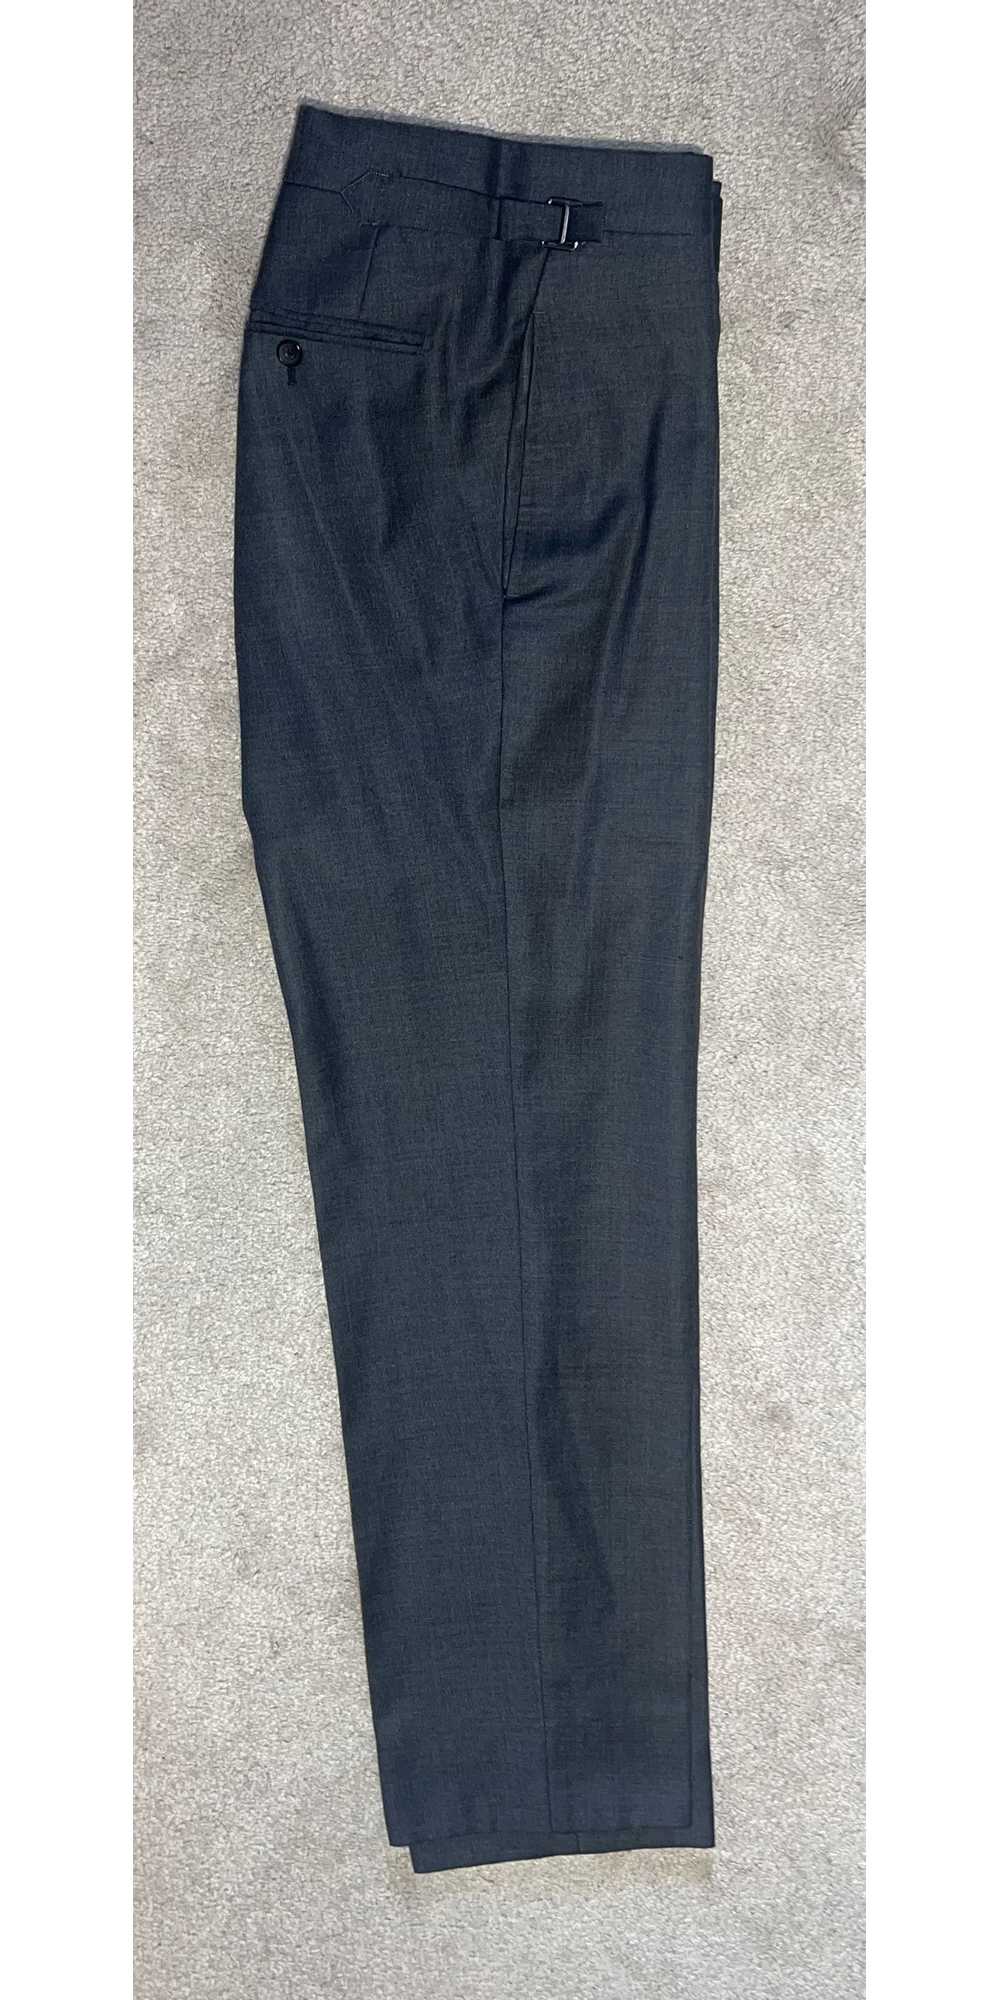 Tom Ford 100% Wool pants - Made in Switzerland - image 2